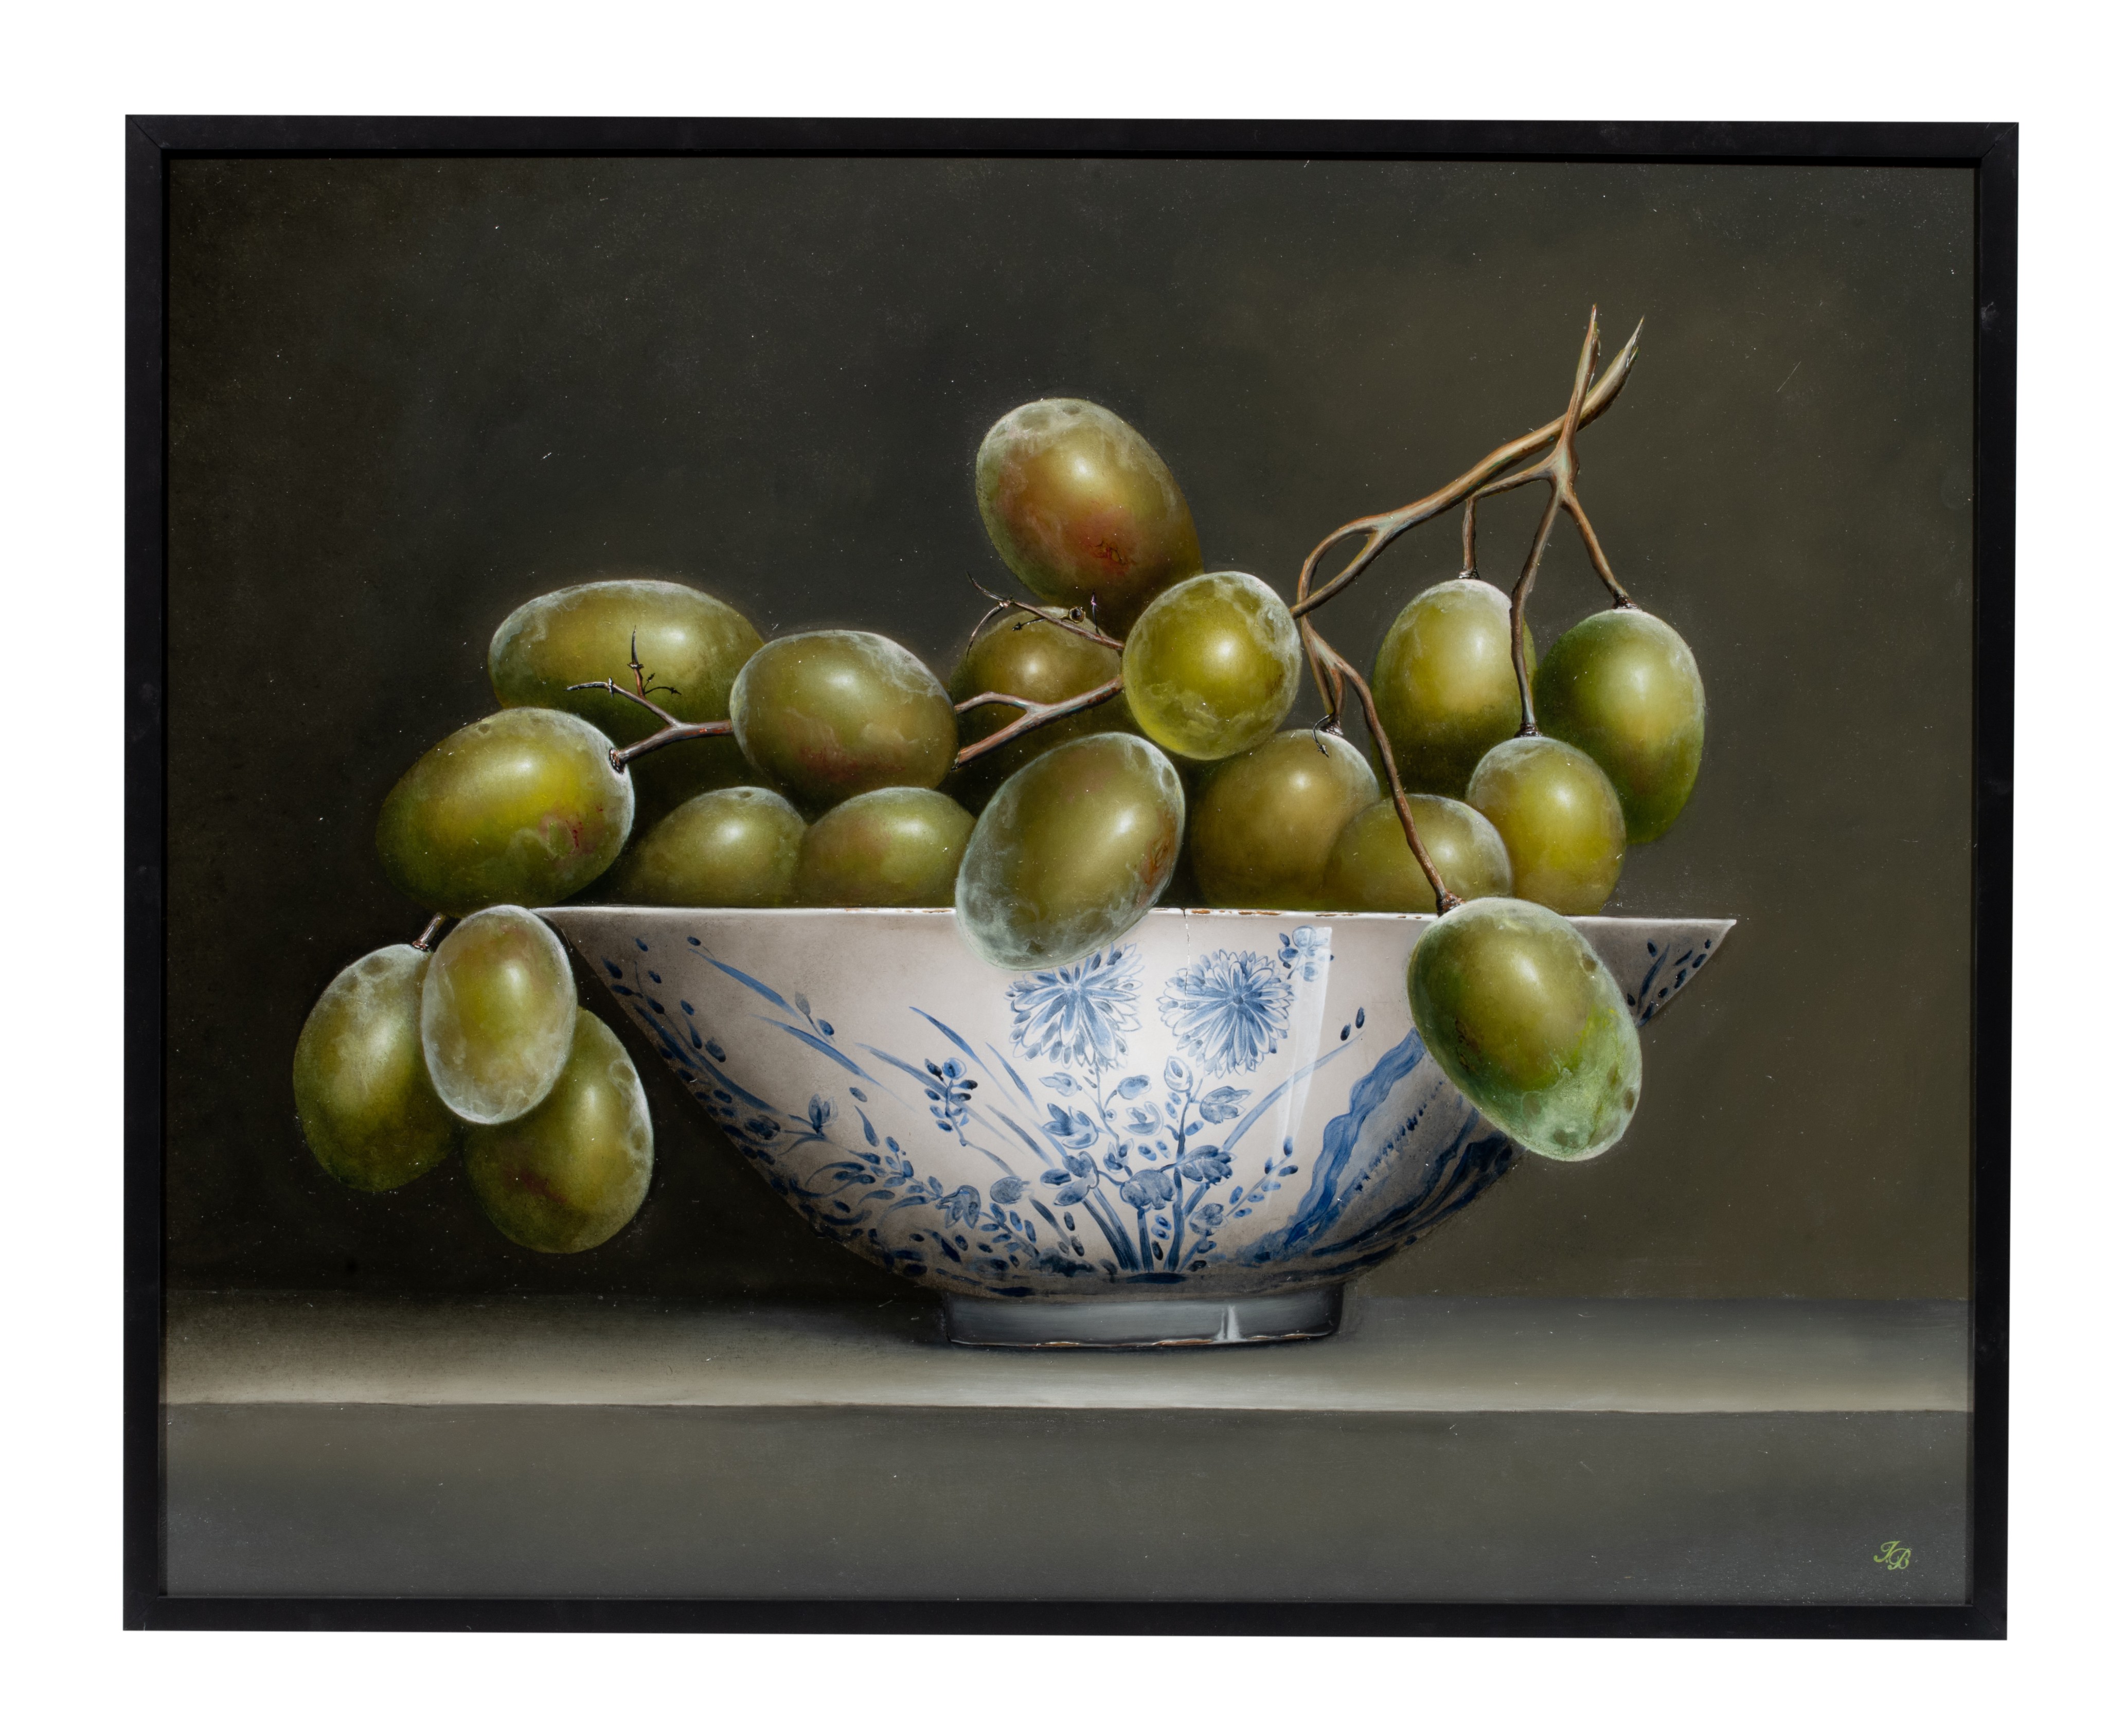 Ignace Bauwens, still life with grapes in a Chinese blossom bowl, oil on panel, 80 x 100 cm - Image 2 of 7